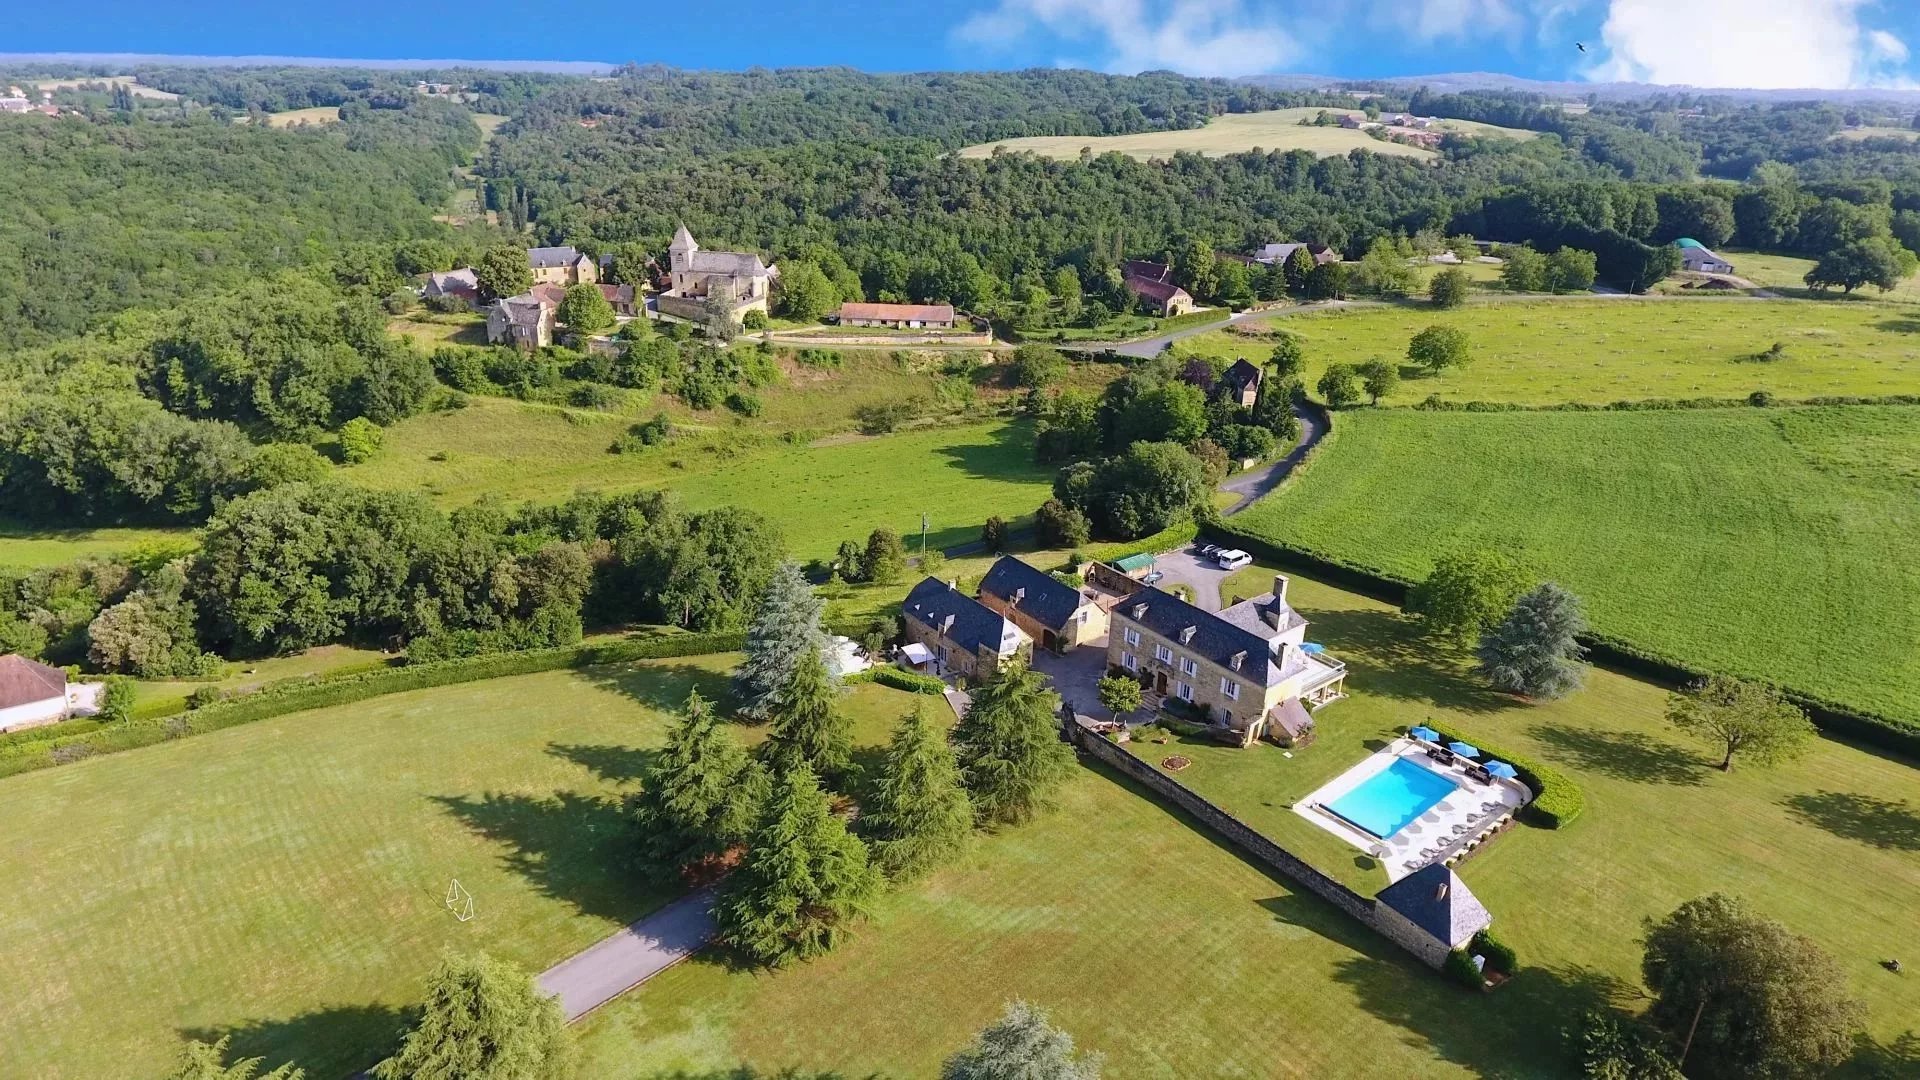 Stunning Manor House, two guest houses and two pools near Sarlat